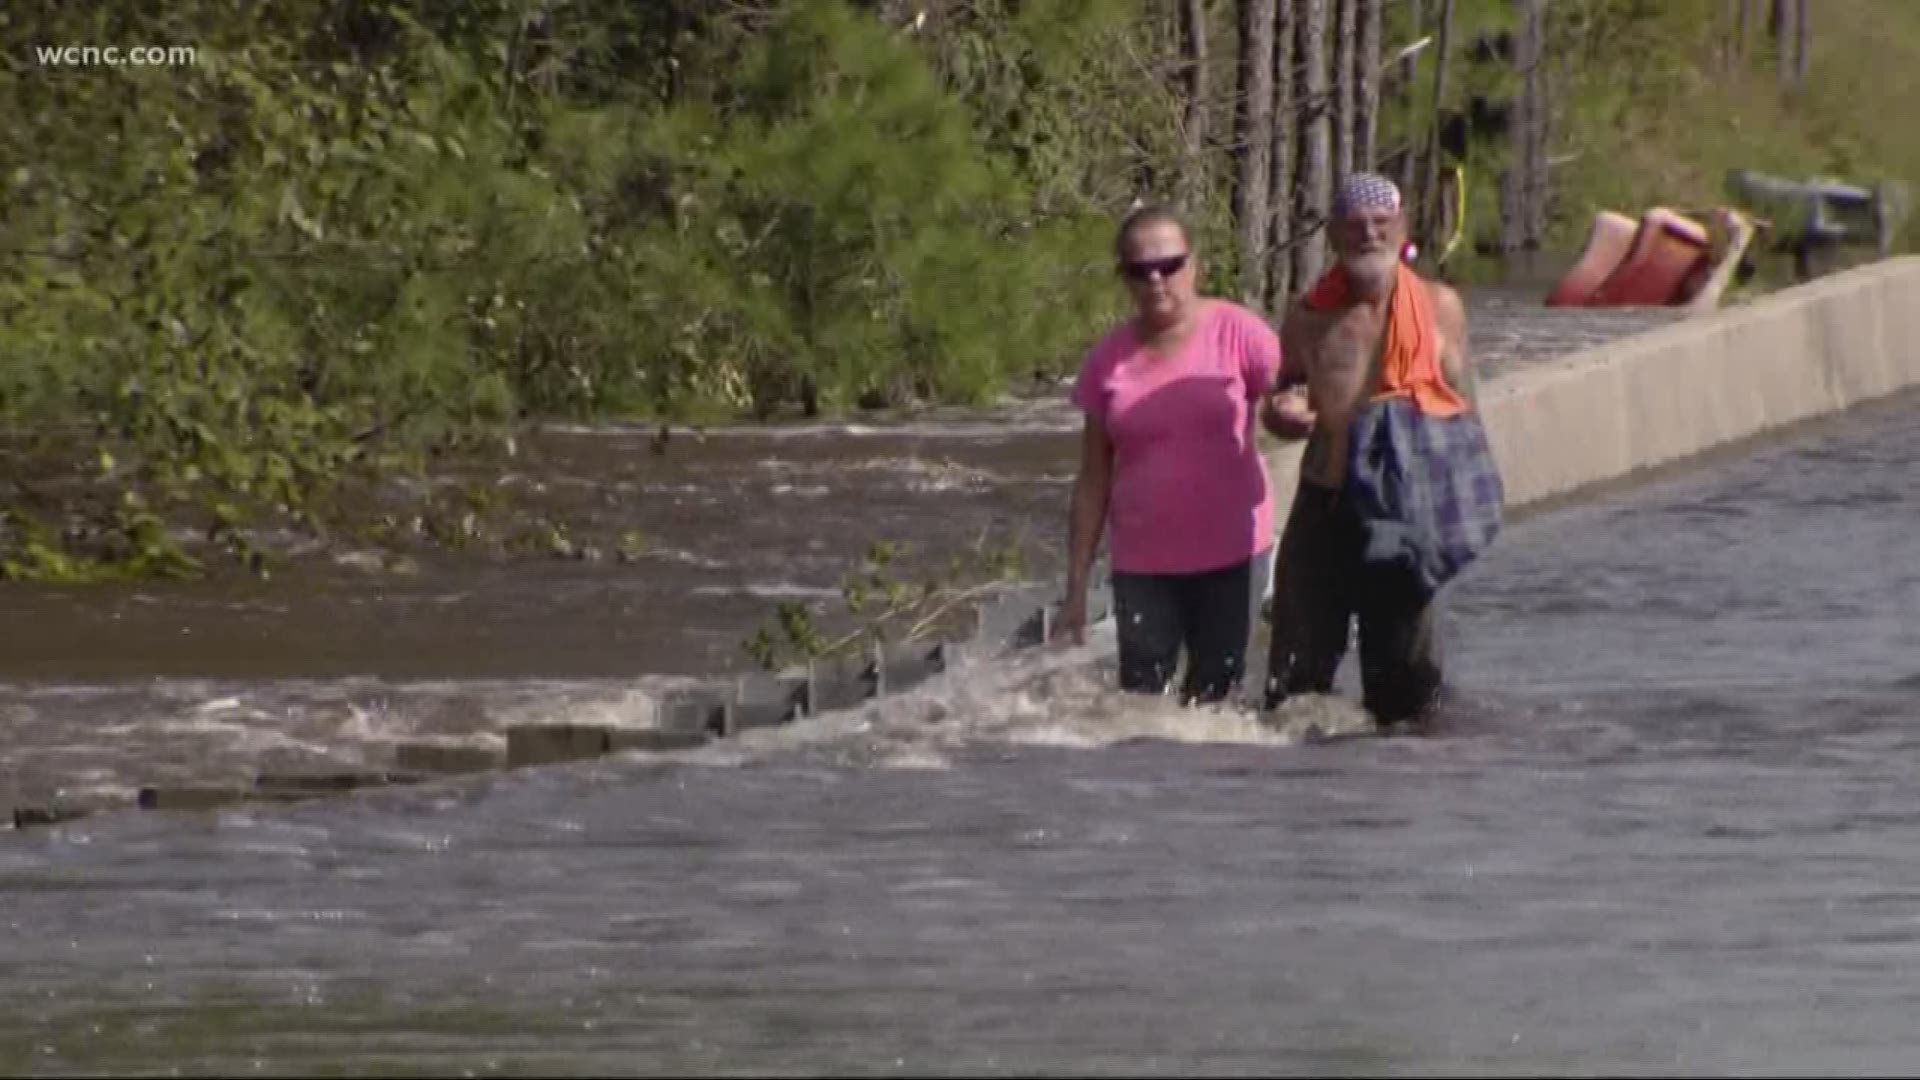 A couple was rescued after they fell into floodwaters as they attempted to cross a flooded bridge.